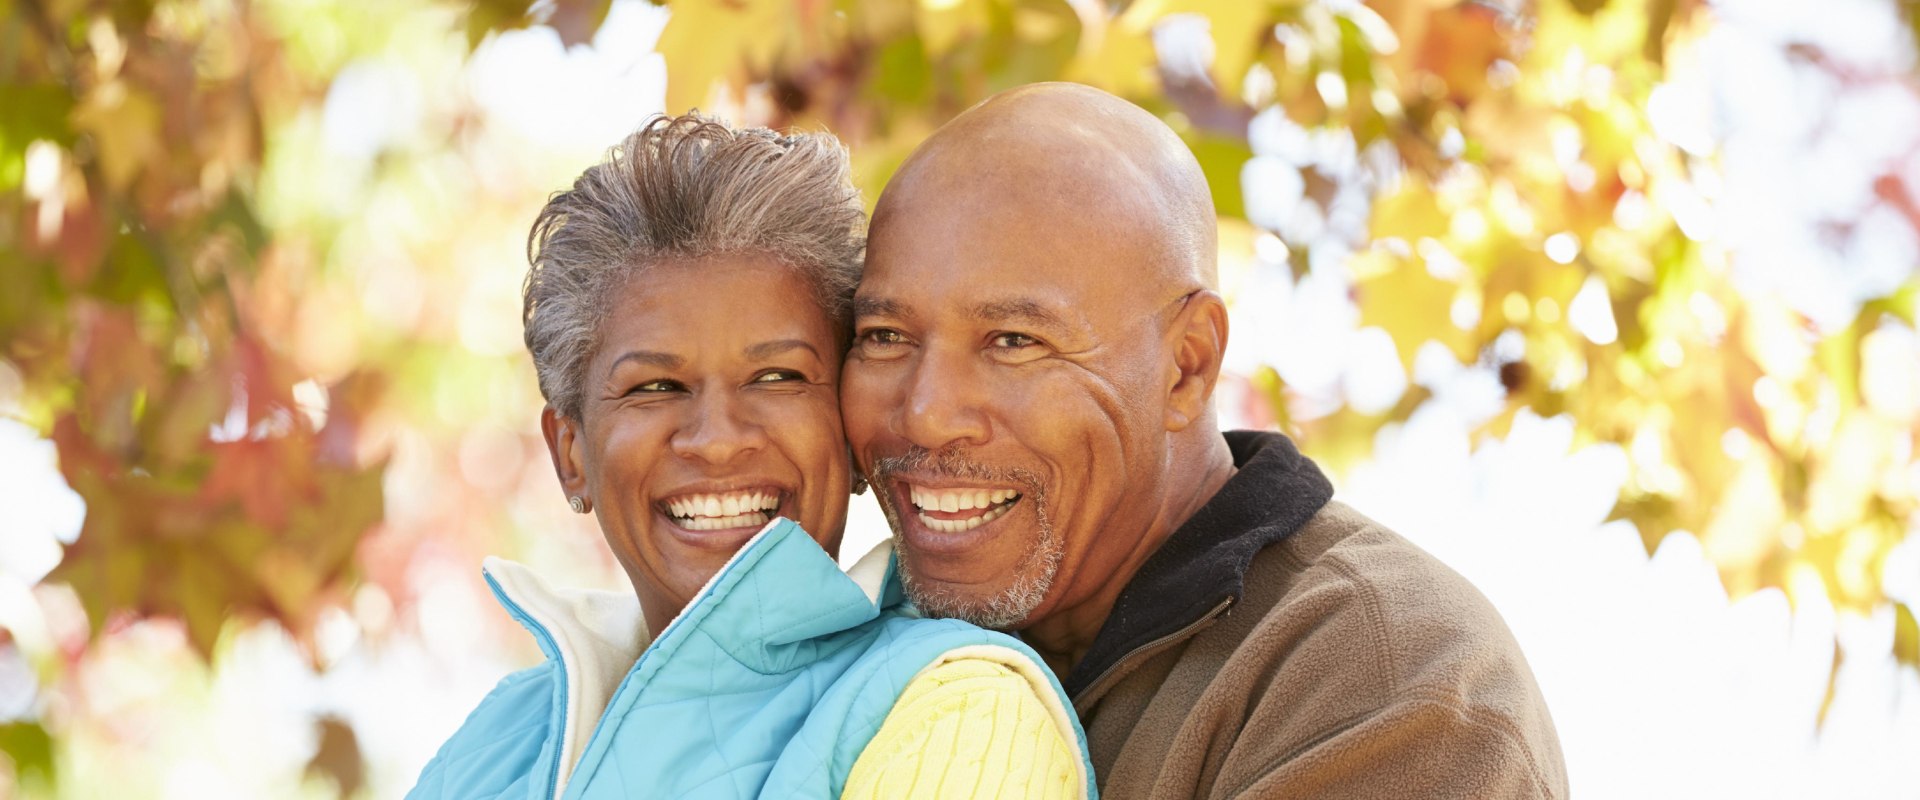 Healthy Lifestyle Changes for Seniors